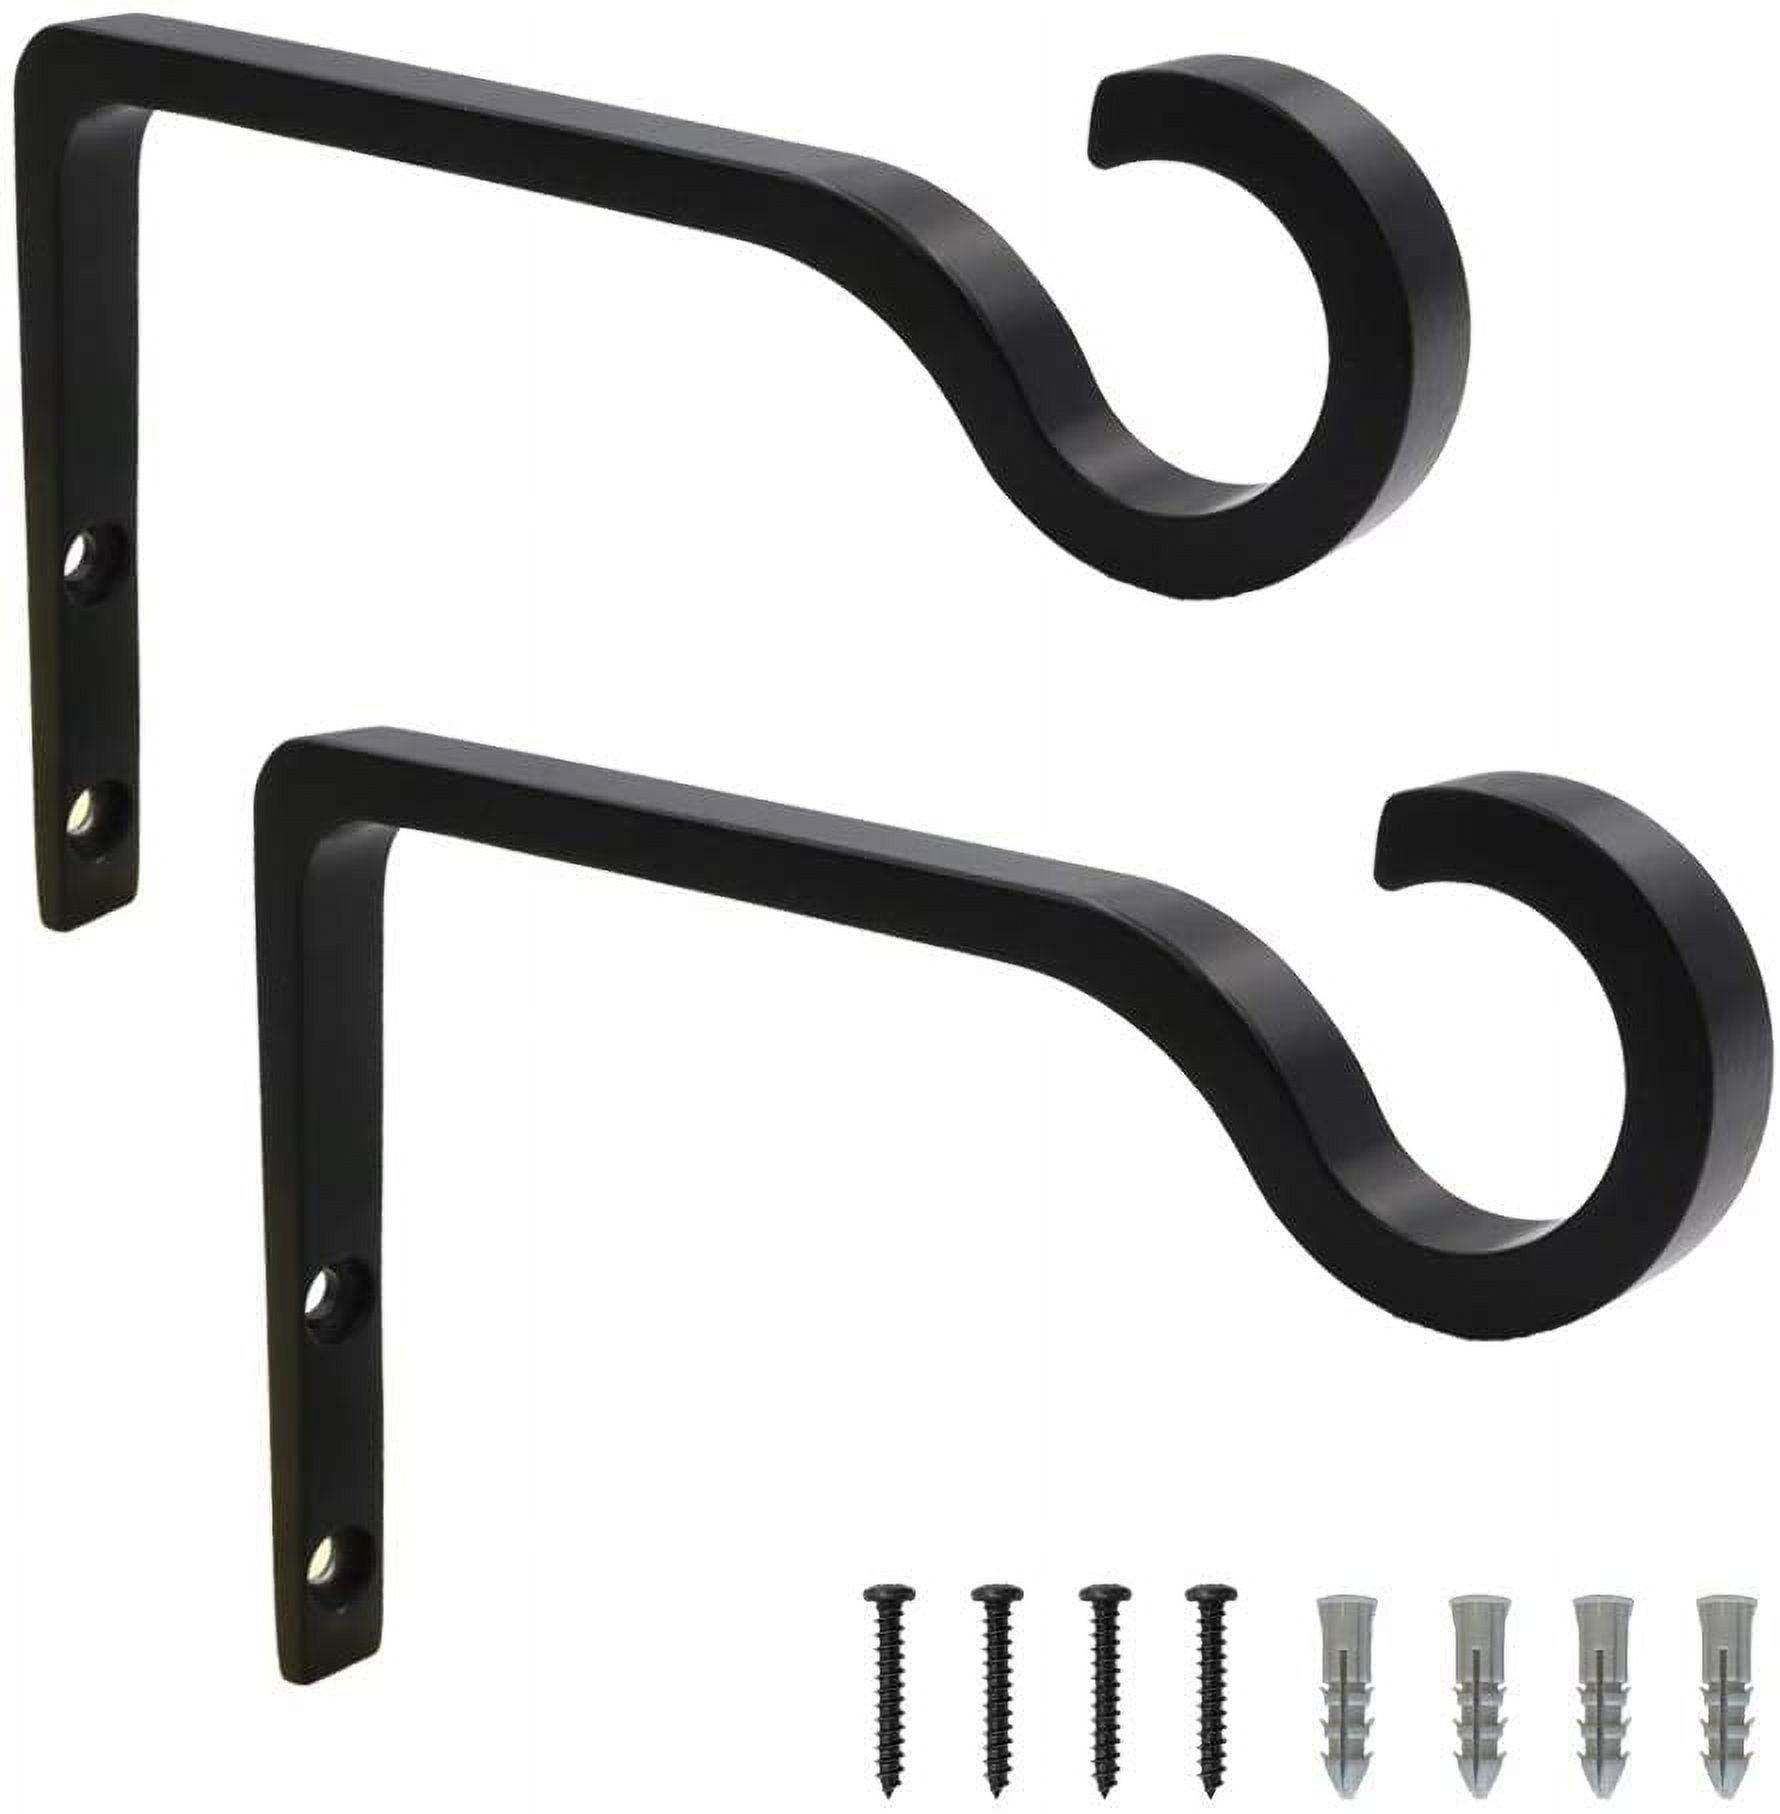 Decorative Black Metal Wall Planter Hooks for Hanging Plants and